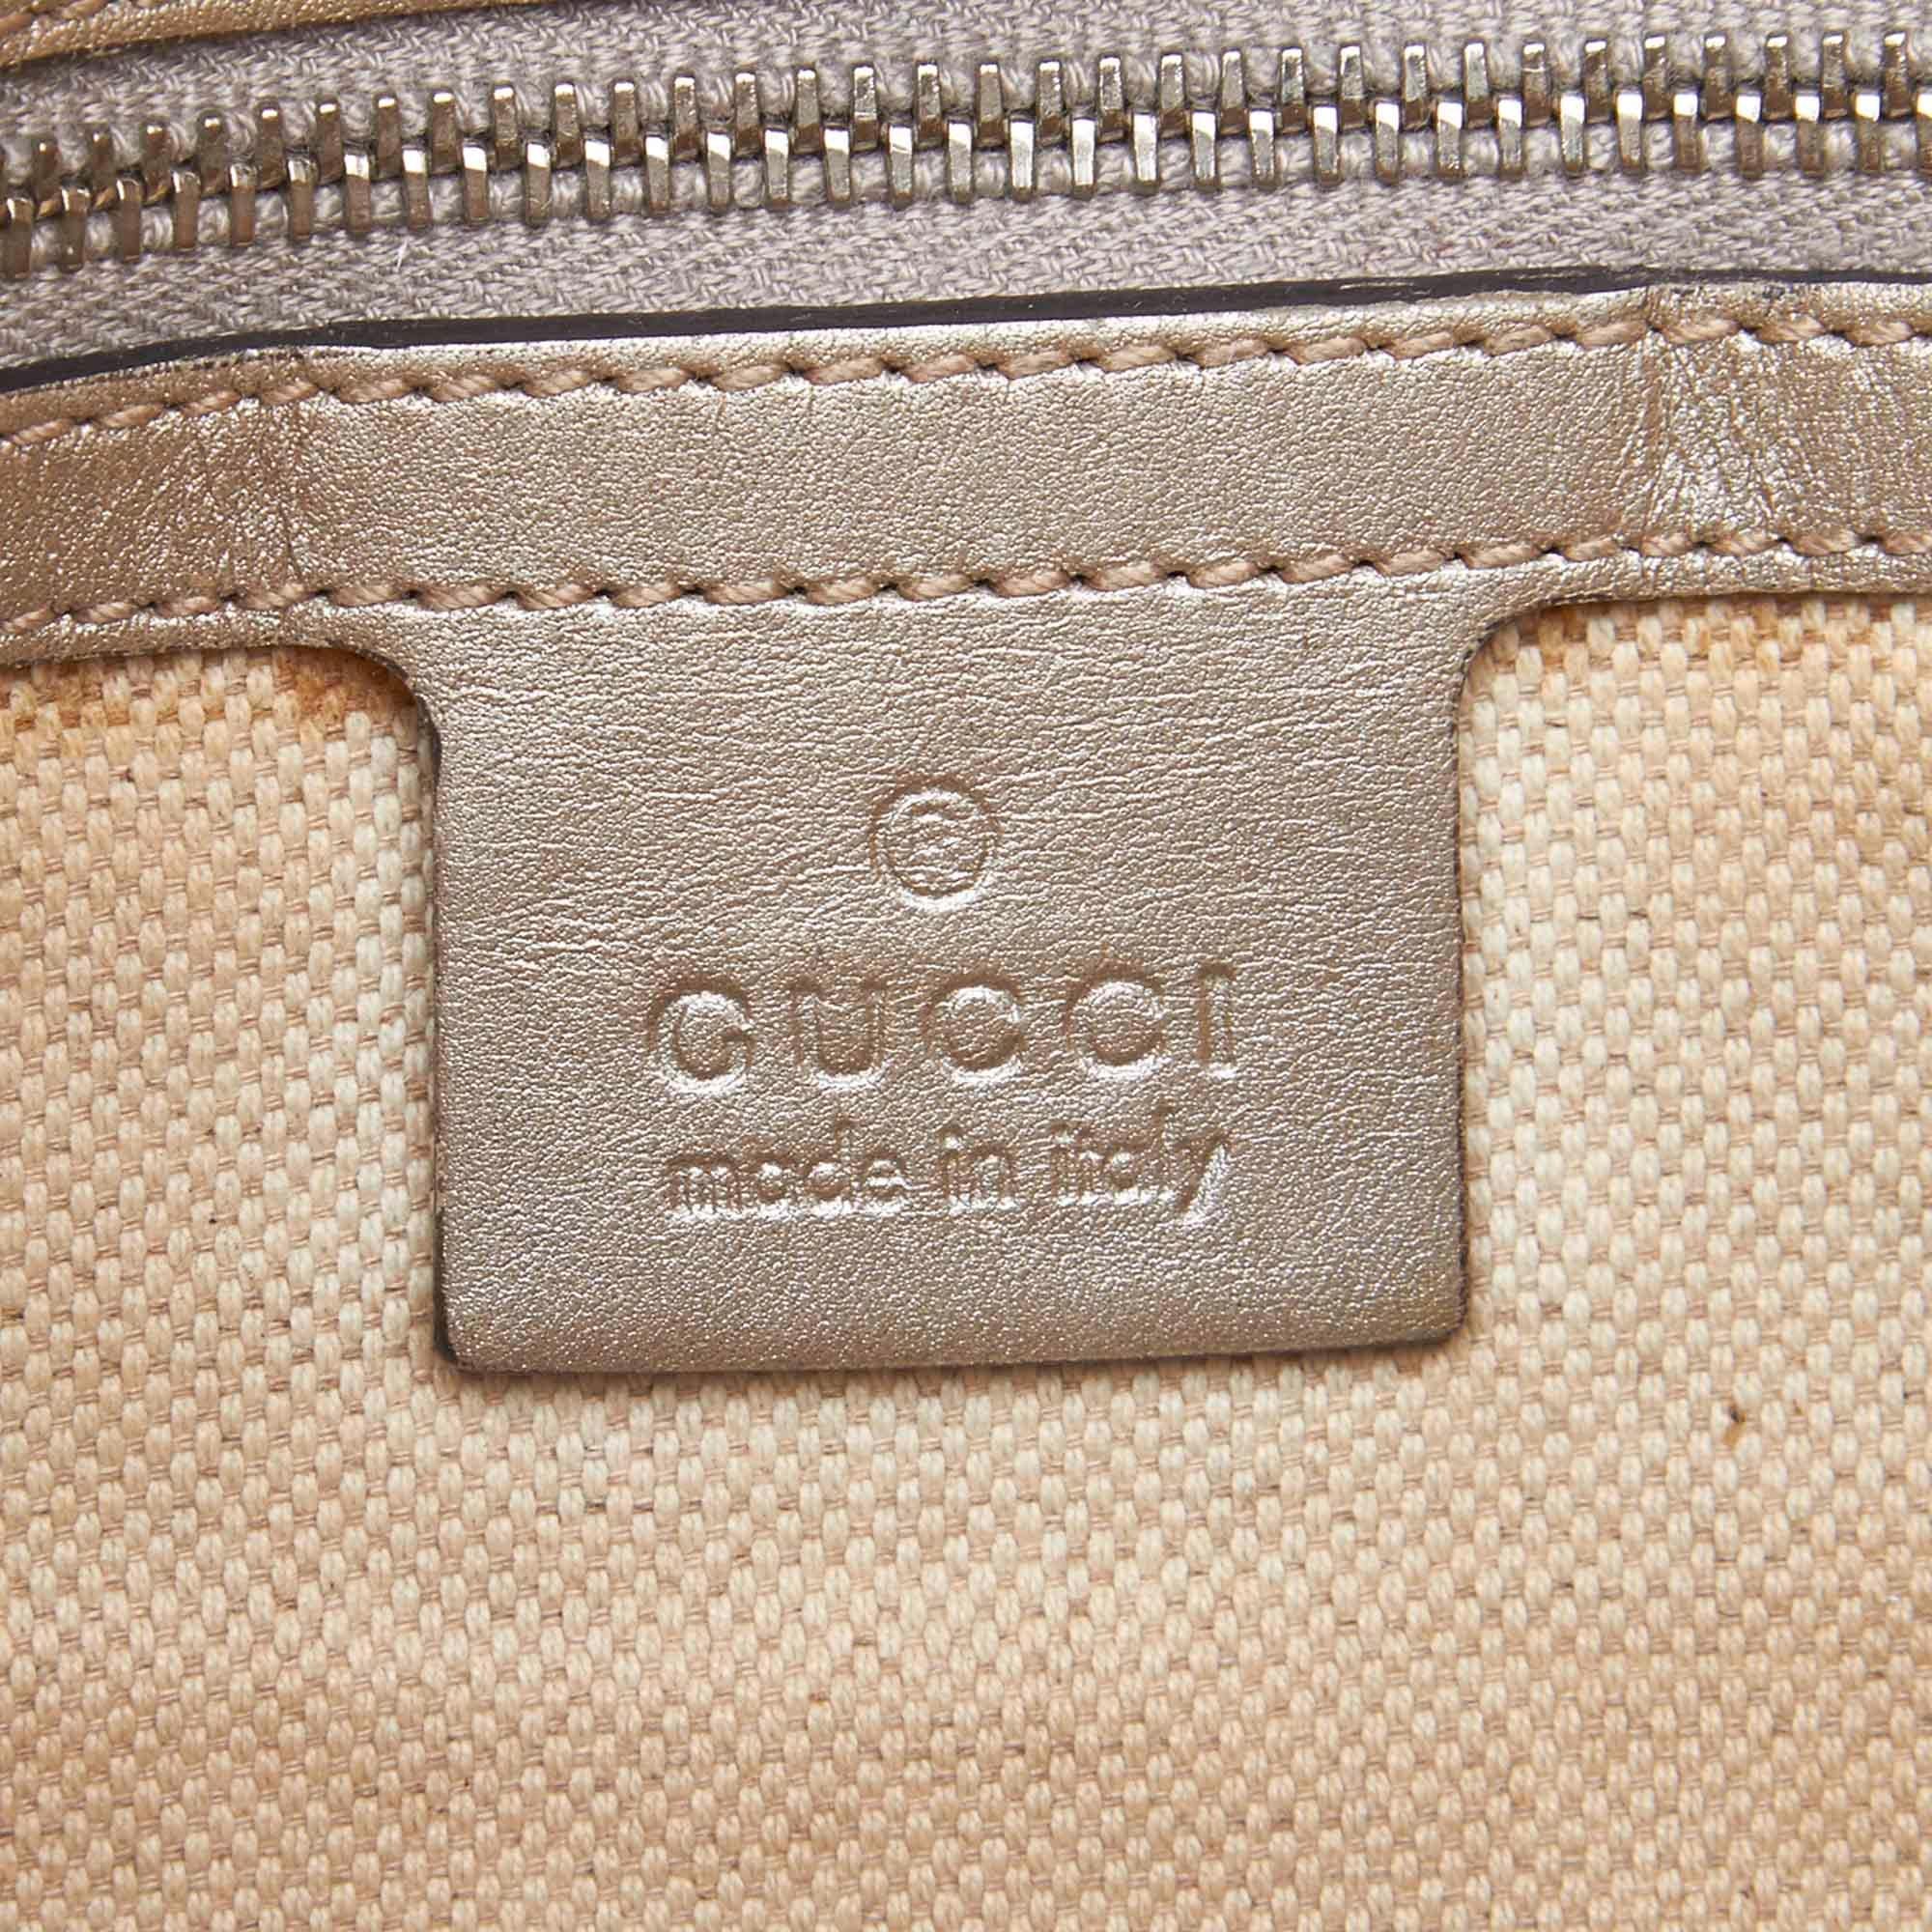 Vintage Authentic Gucci Silver GG Supreme Imprime Tote Bag Italy LARGE  For Sale 2